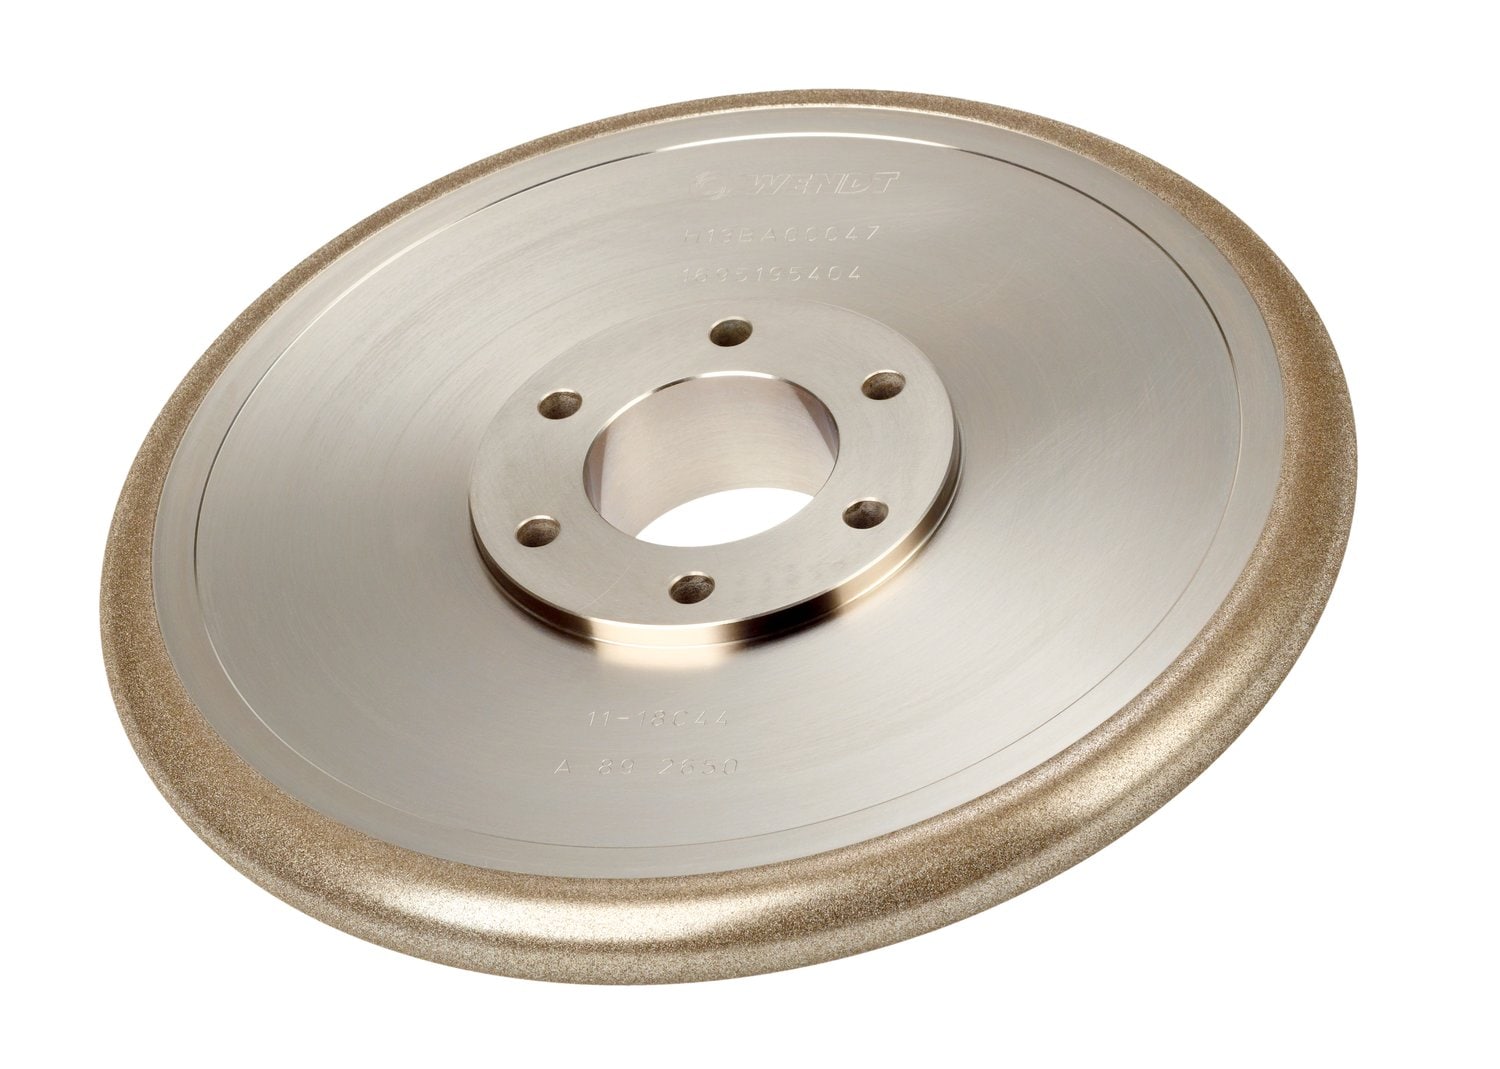 7010497594 - 3M Electroplated CBN Wheels and Tools, PLATED BURRS, DIAMOND, K7010-11
- MMMF24812